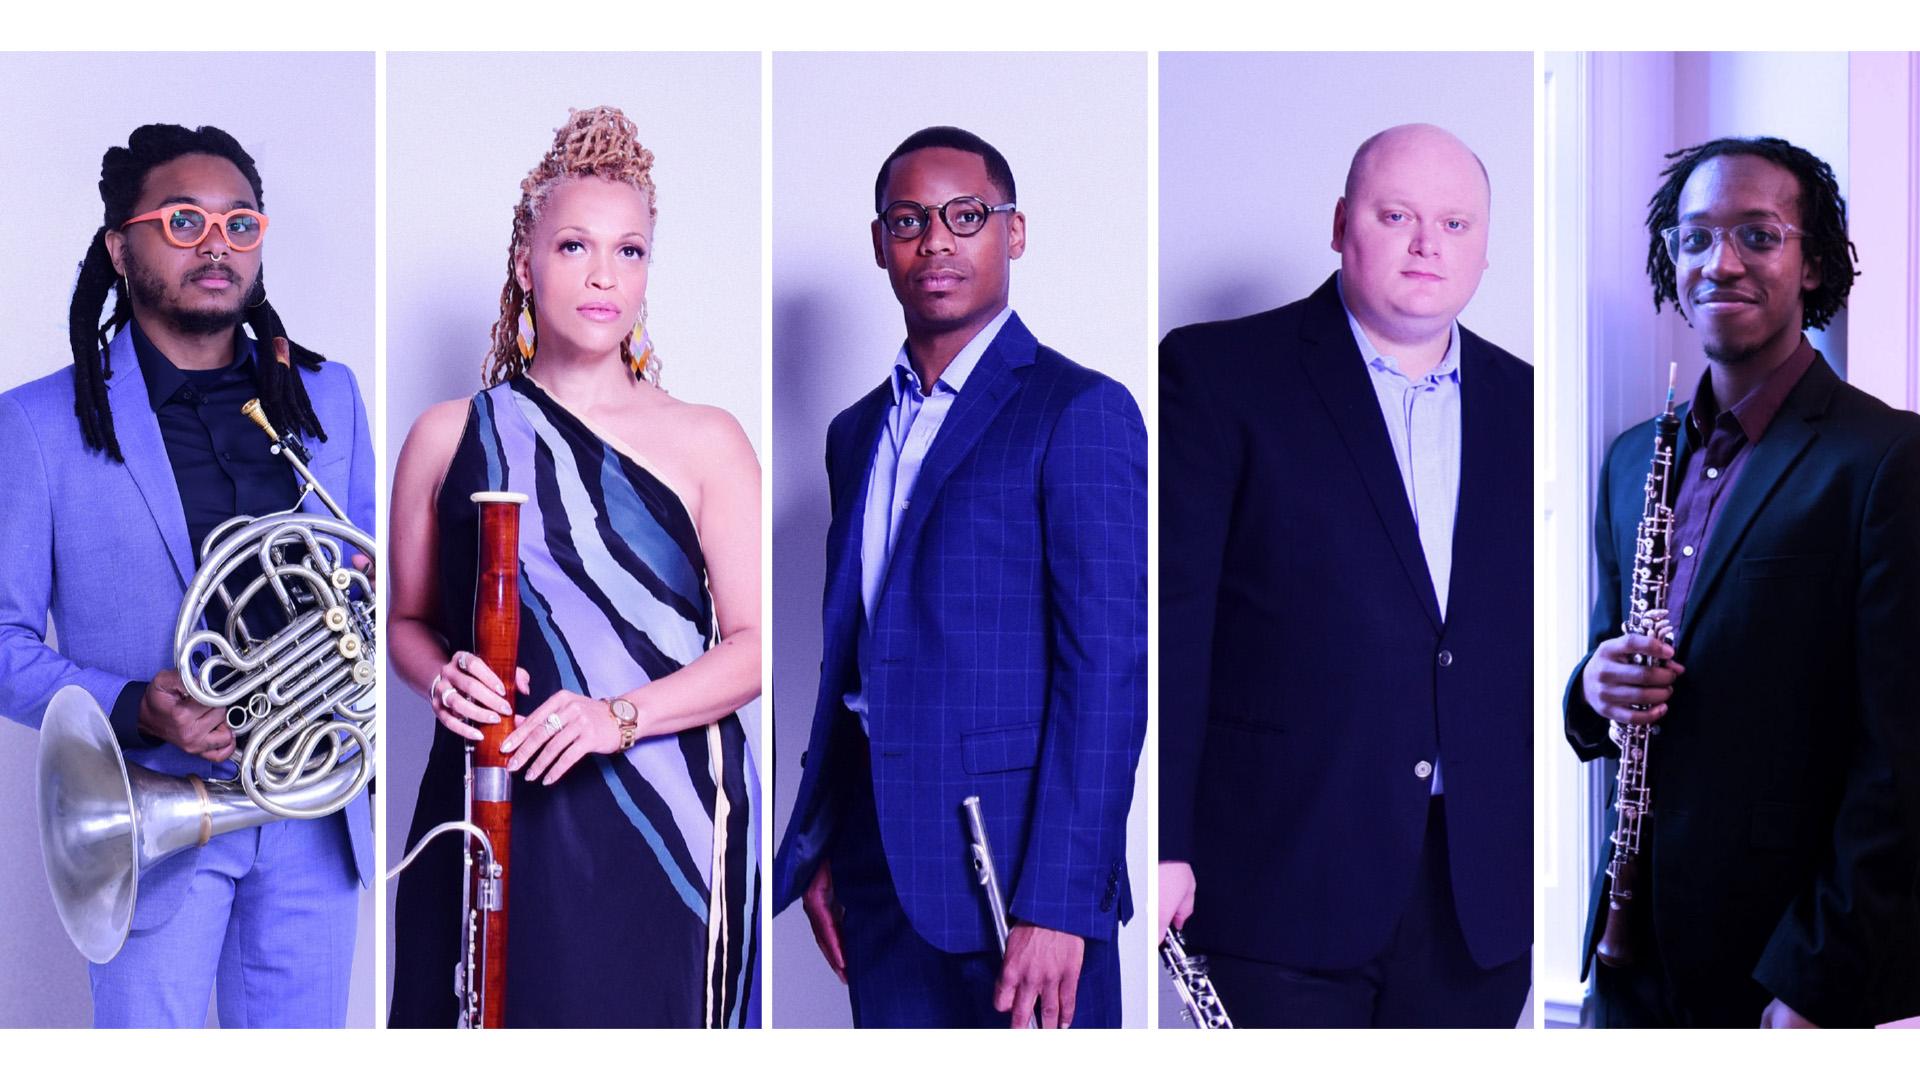 Members of the Imani Winds quintet